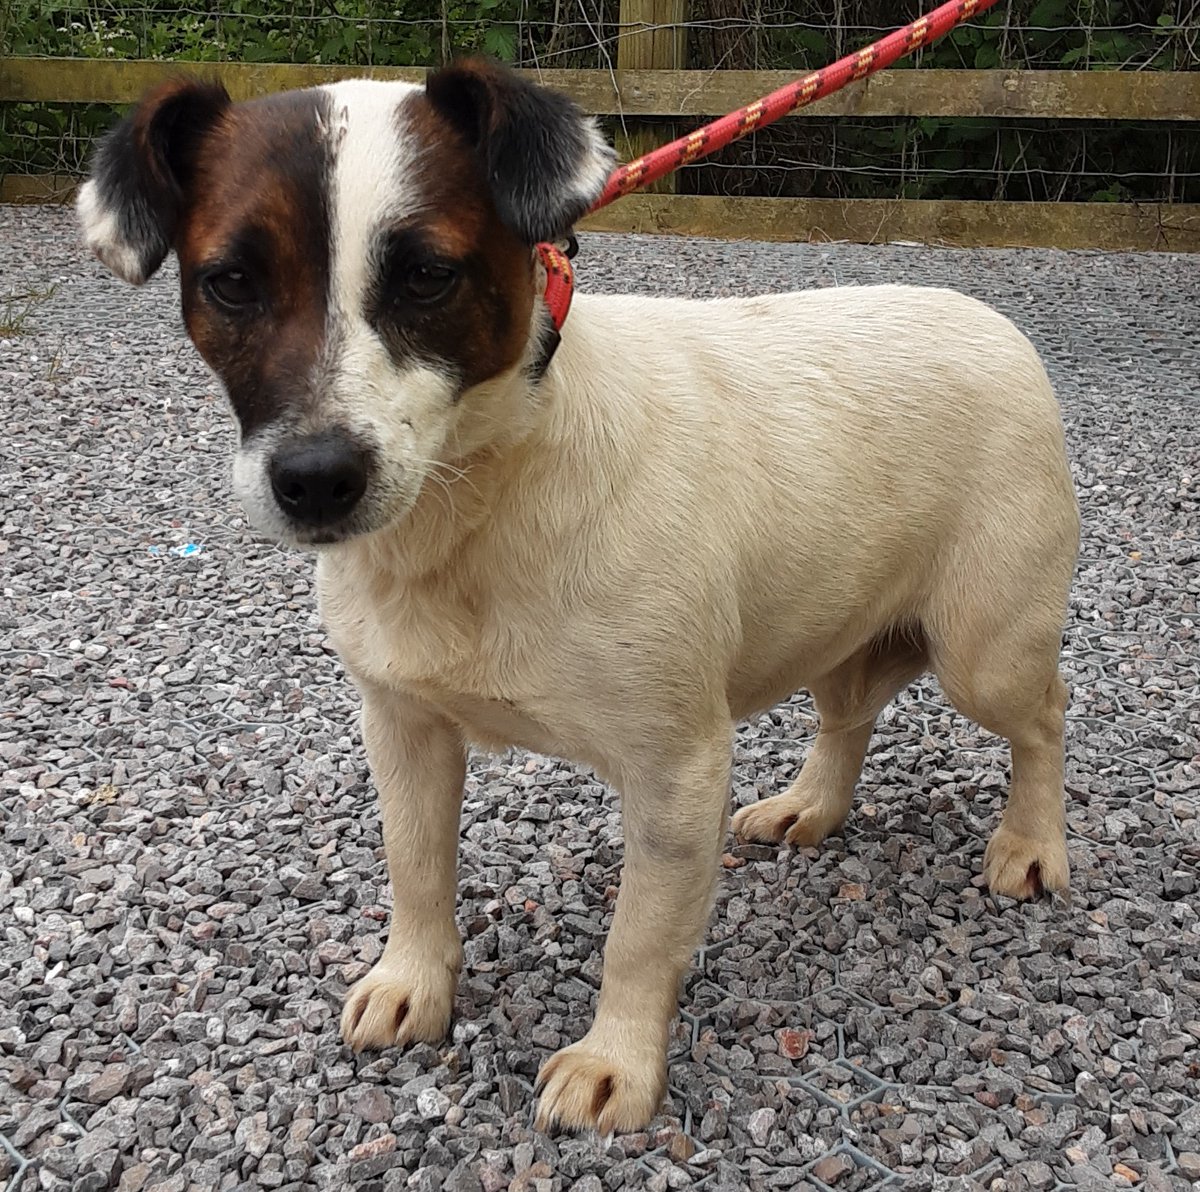 Urgent, please retweet to help find the owner or a rescue space for this stray dog found/abandoned #HIGHWYCOMBE #BUCKINGHAMSHIRE #UK 🆘 Female, Jack Russell Terrier, no collar, chip not registered, found 16 May. Now in a council pound, her 7 days are nearly up. Please share